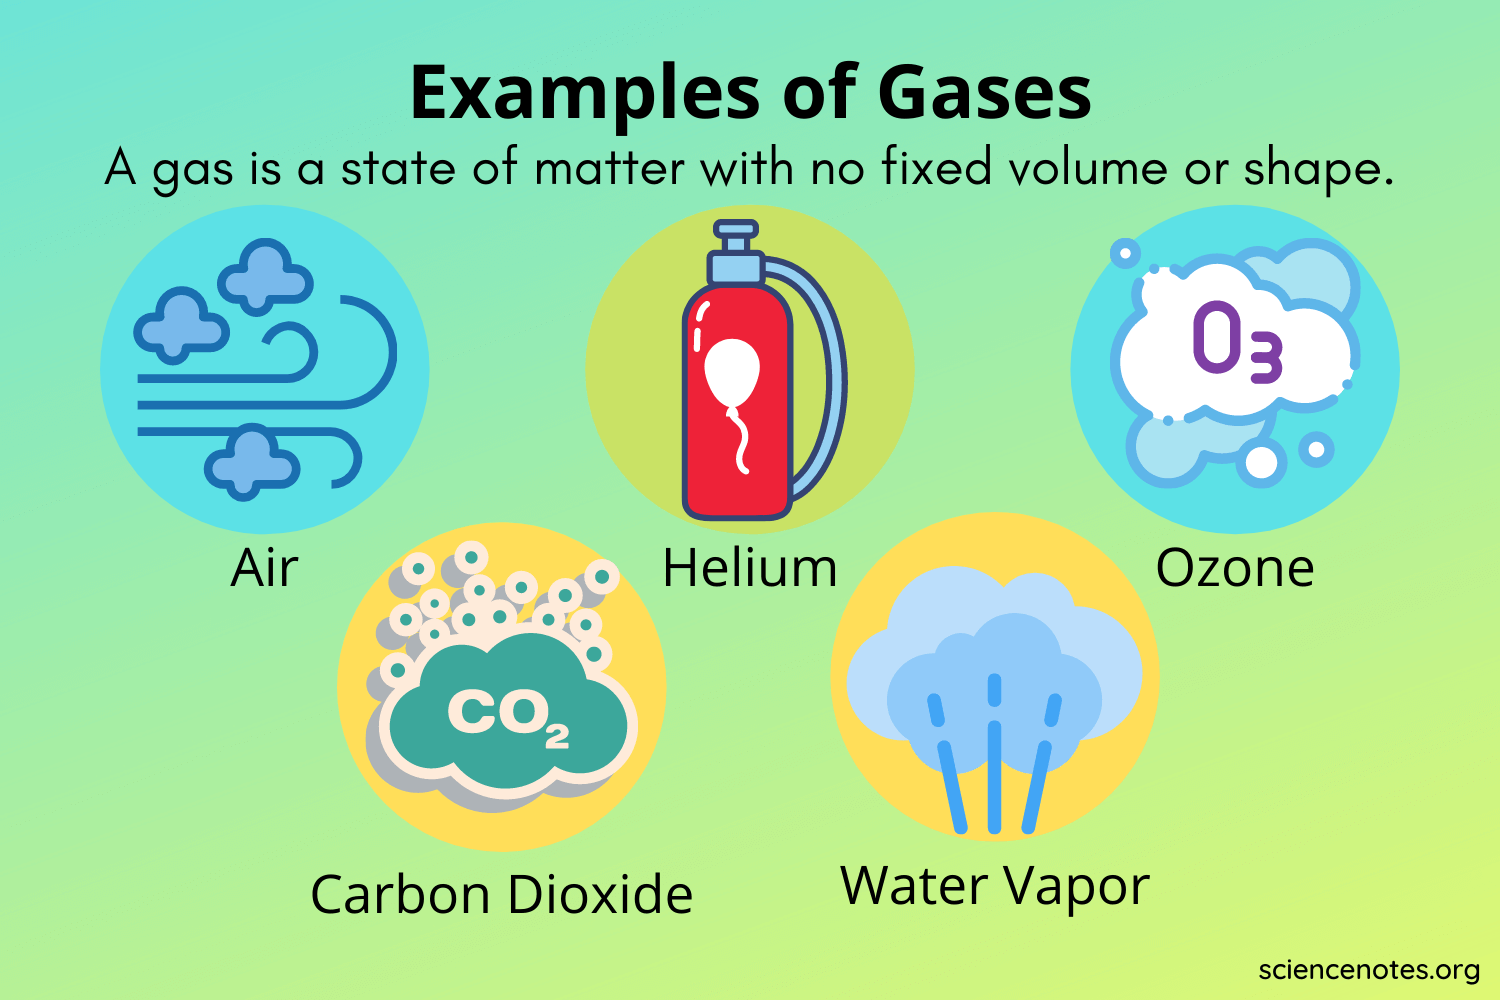 Examples of Gases - What Is a Gas?